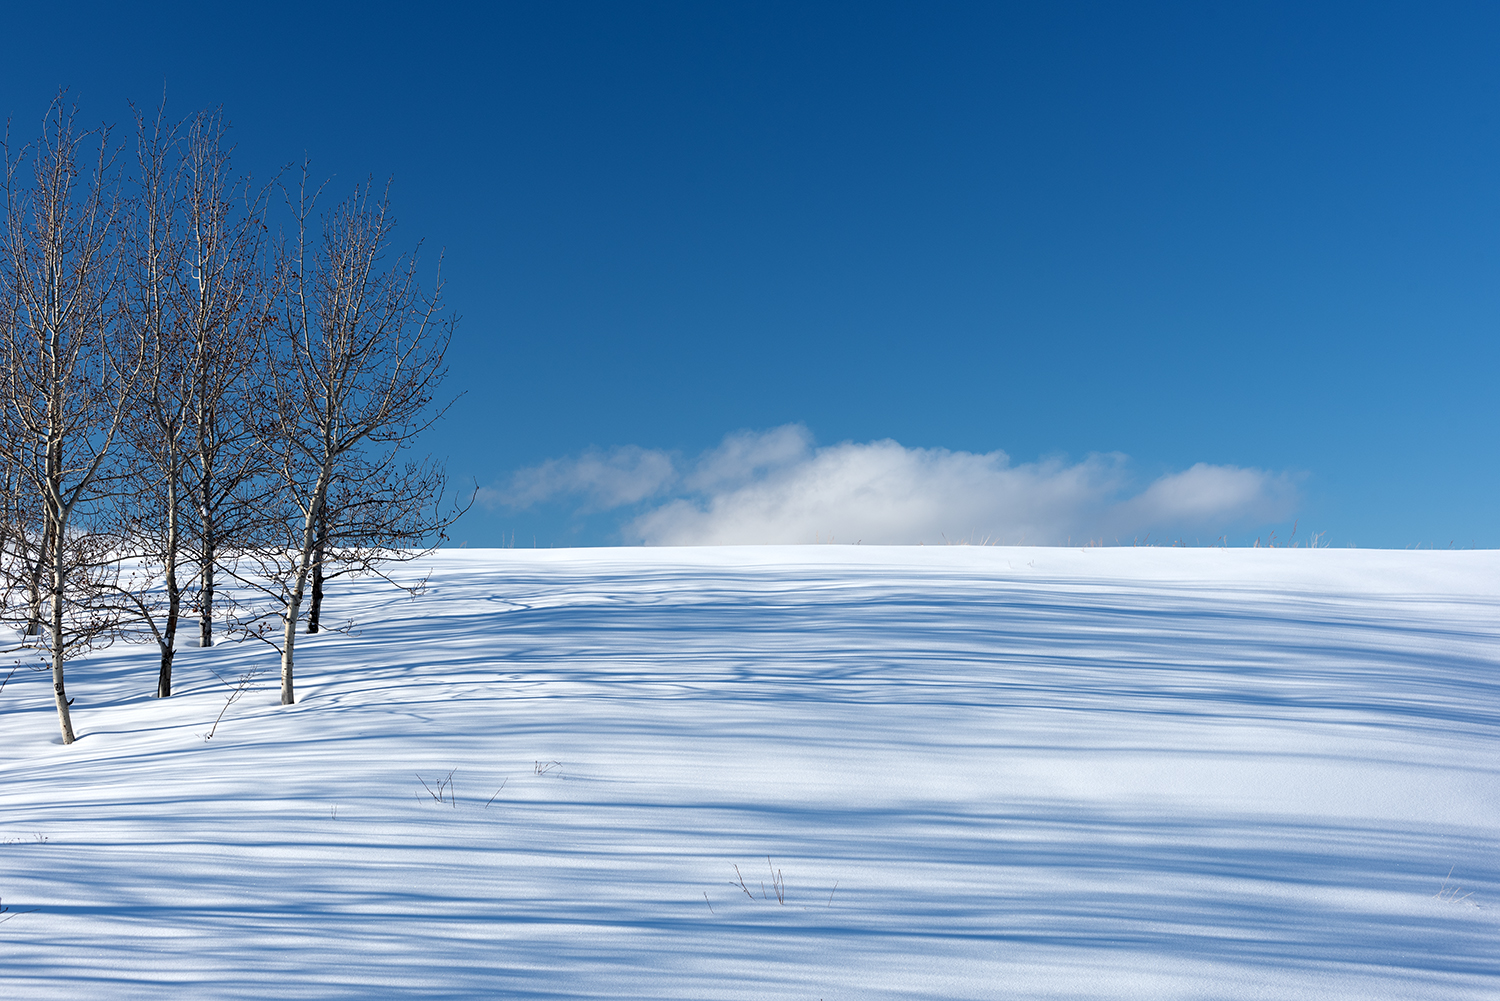 Beautiful land covered with snow along with two trees